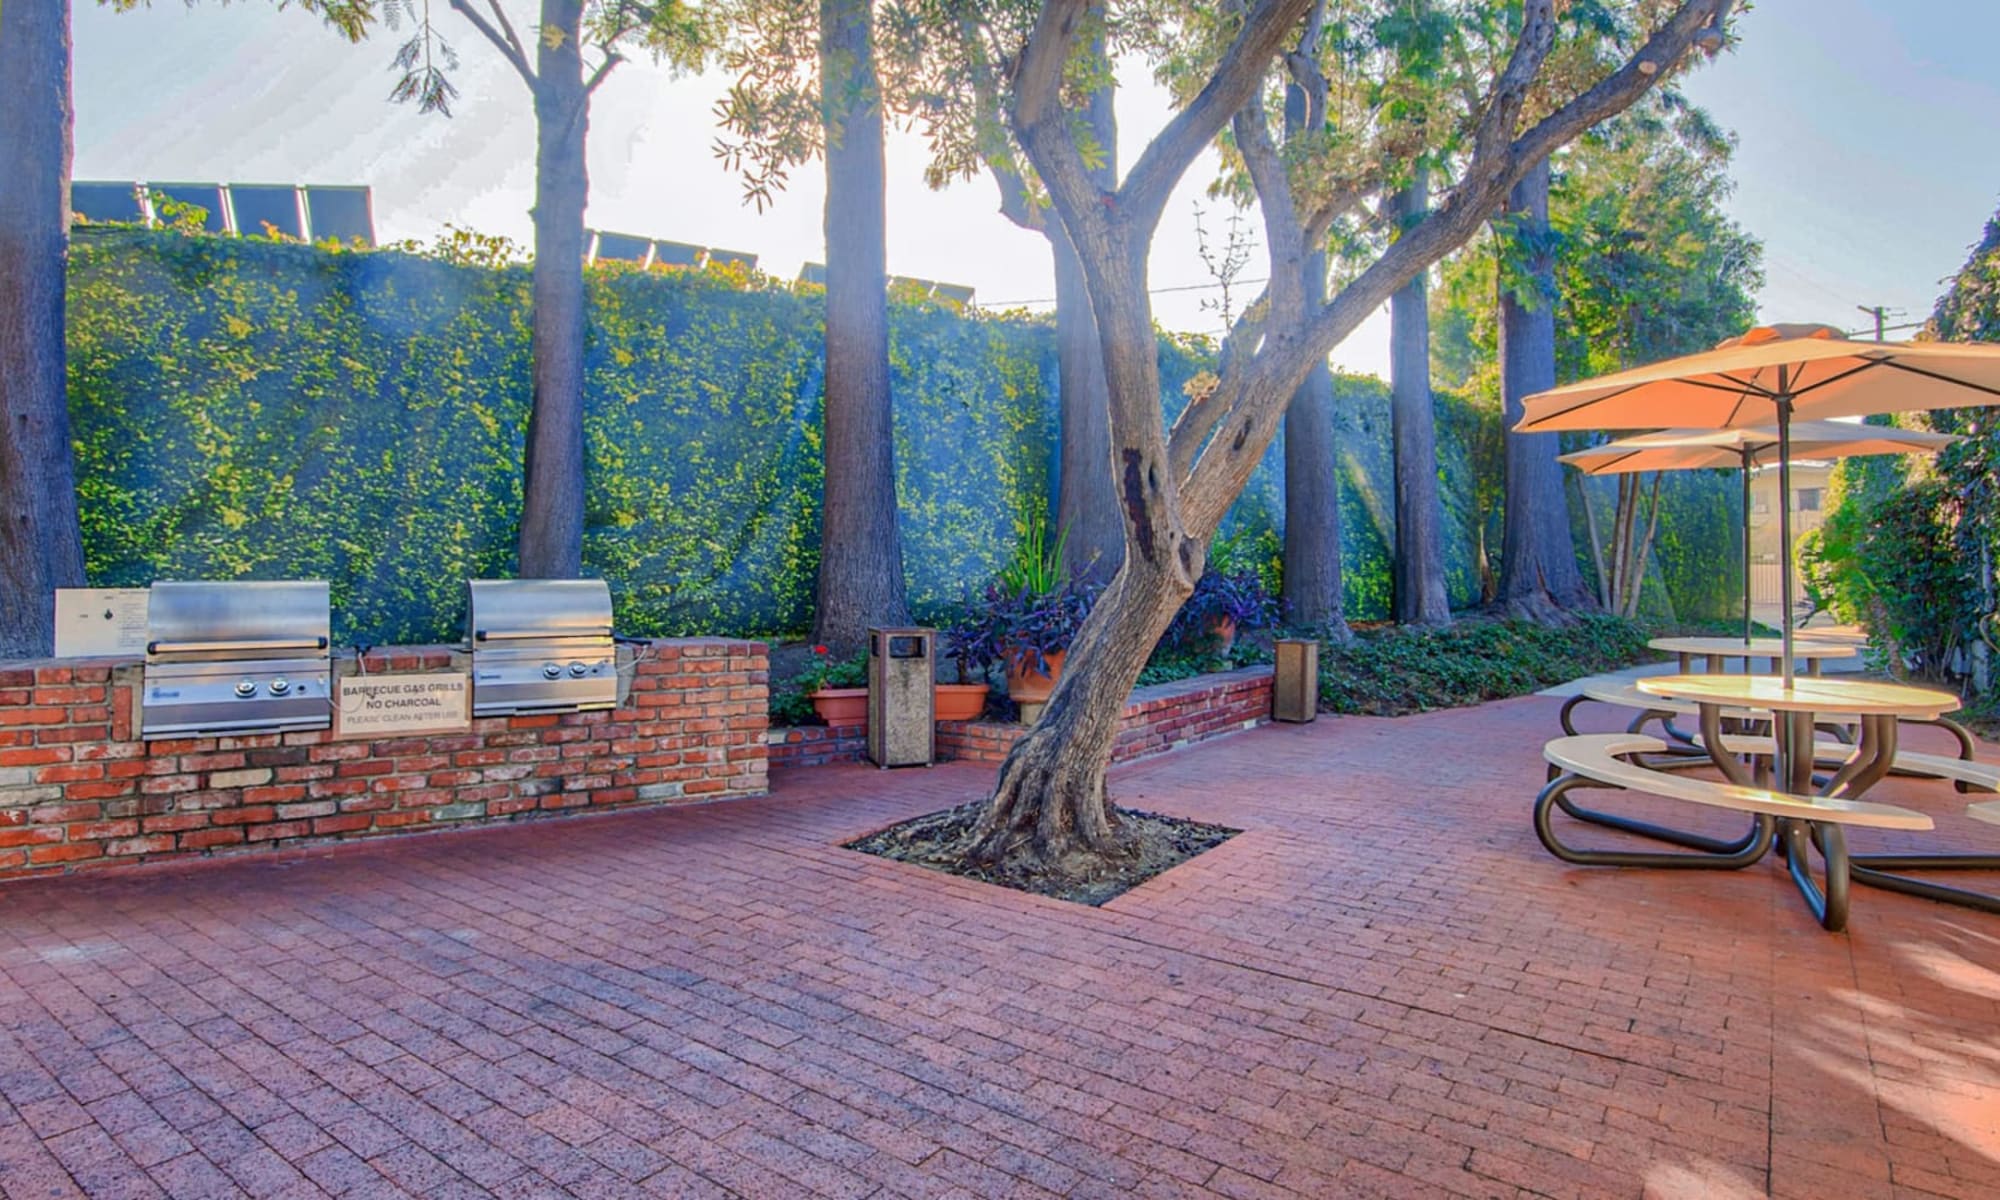 Barbecue area with a brick courtyard, gas grills and mature trees at Villa Vicente in Los Angeles, California